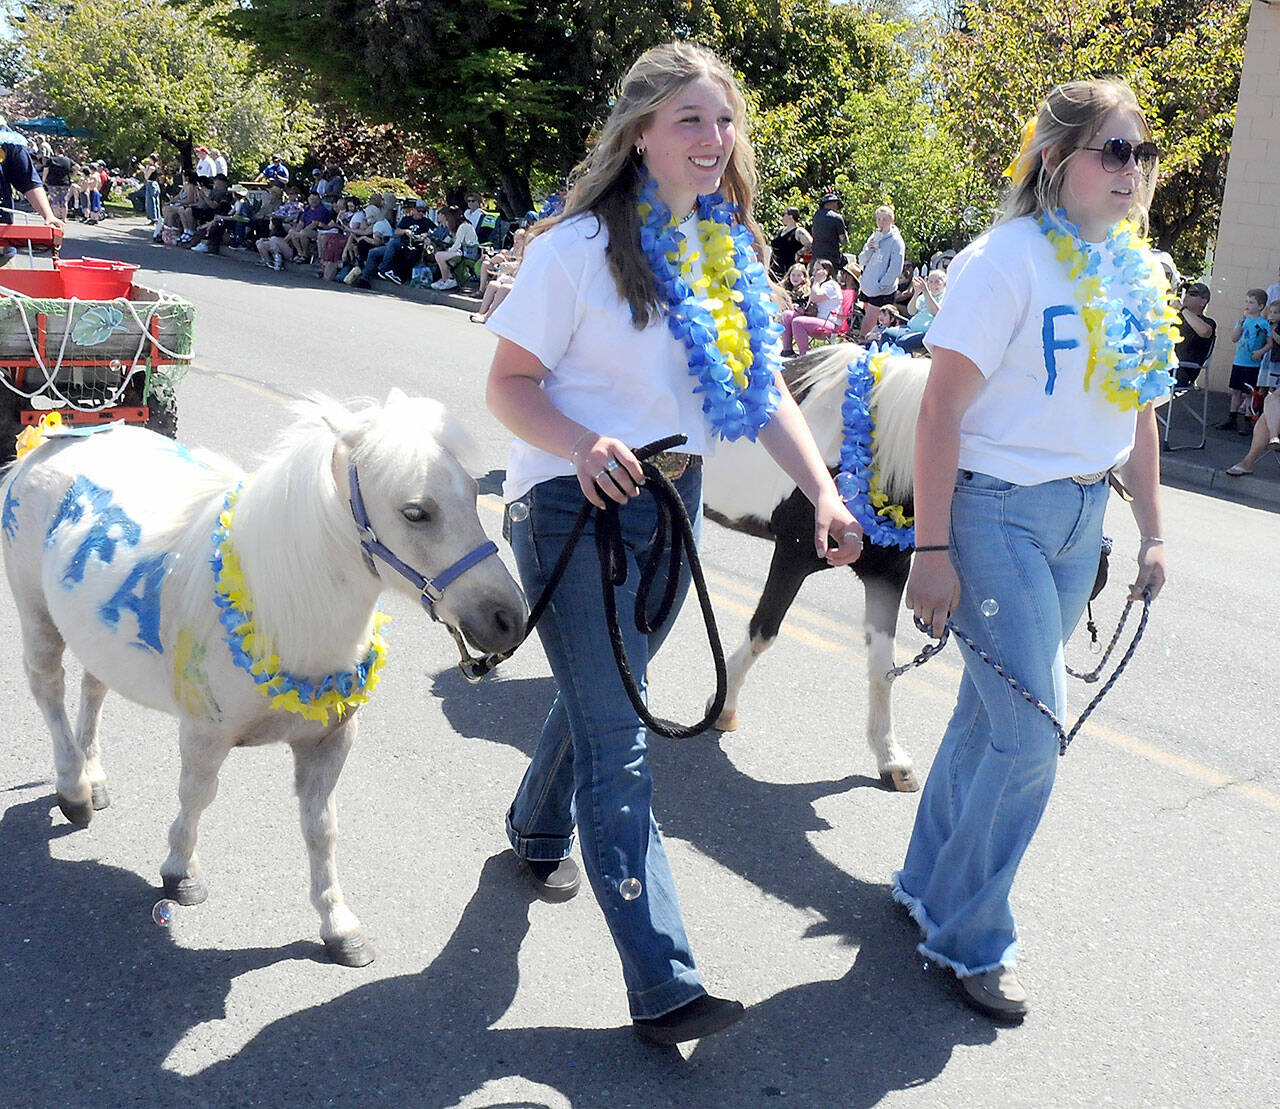 Sequim High School Future Farmers of America members Paige Reed, left, and Grace Reed, both 15, lead miniature ponies Tiny Tim and Gypsy down the grand parade route on Saturday. (Keith Thorpe/Peninsula Daily News)